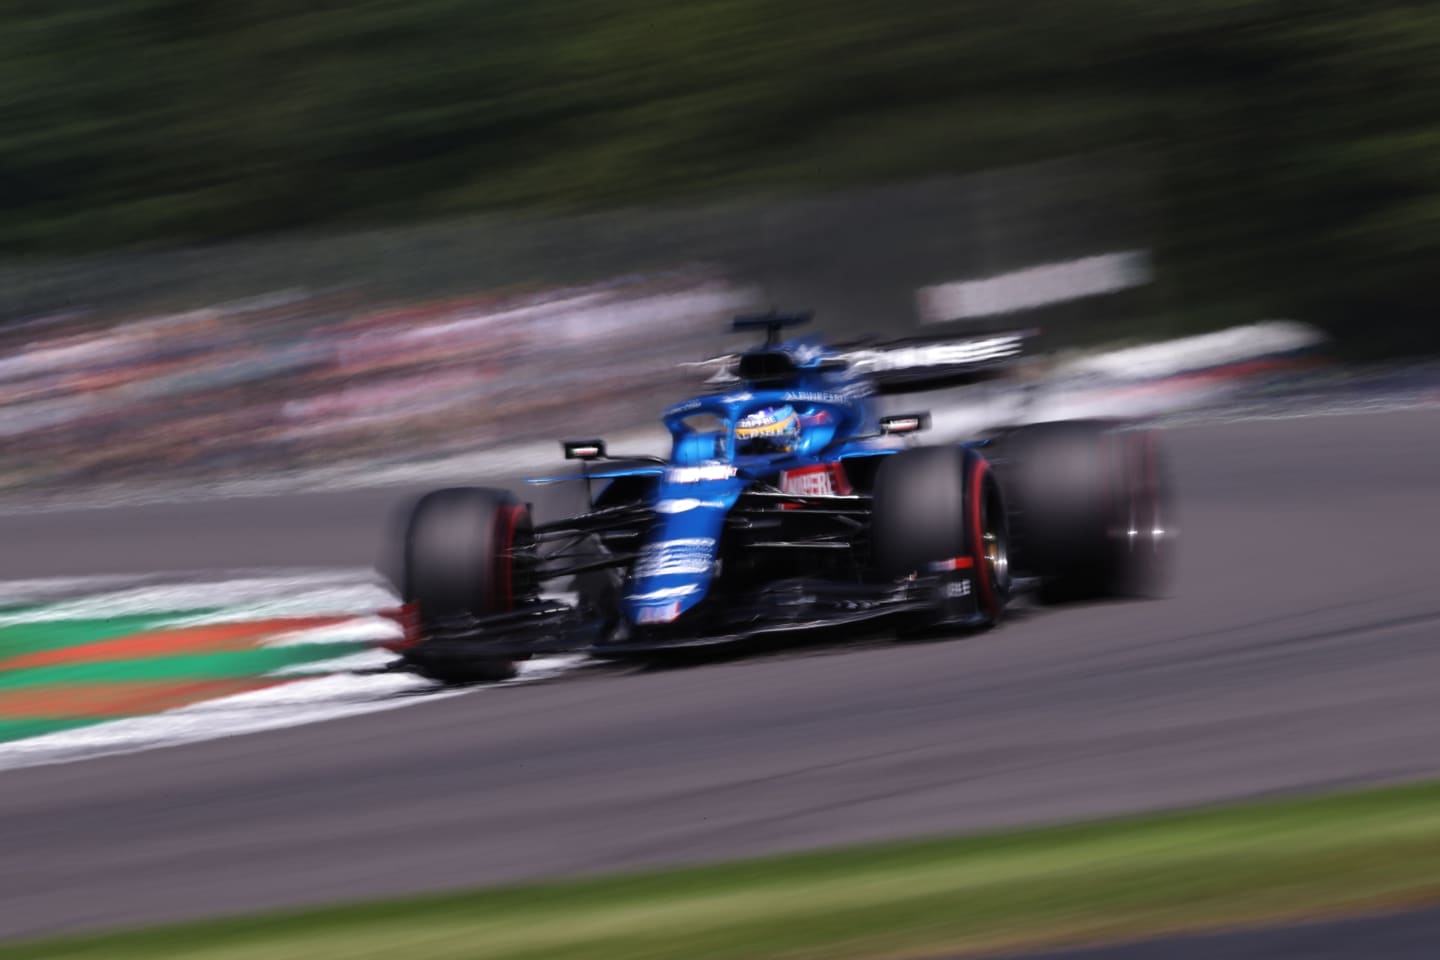 NORTHAMPTON, ENGLAND - JULY 17: Fernando Alonso of Spain driving the (14) Alpine A521 Renault during practice ahead of the F1 Grand Prix of Great Britain at Silverstone on July 17, 2021 in Northampton, England. (Photo by Lars Baron/Getty Images)